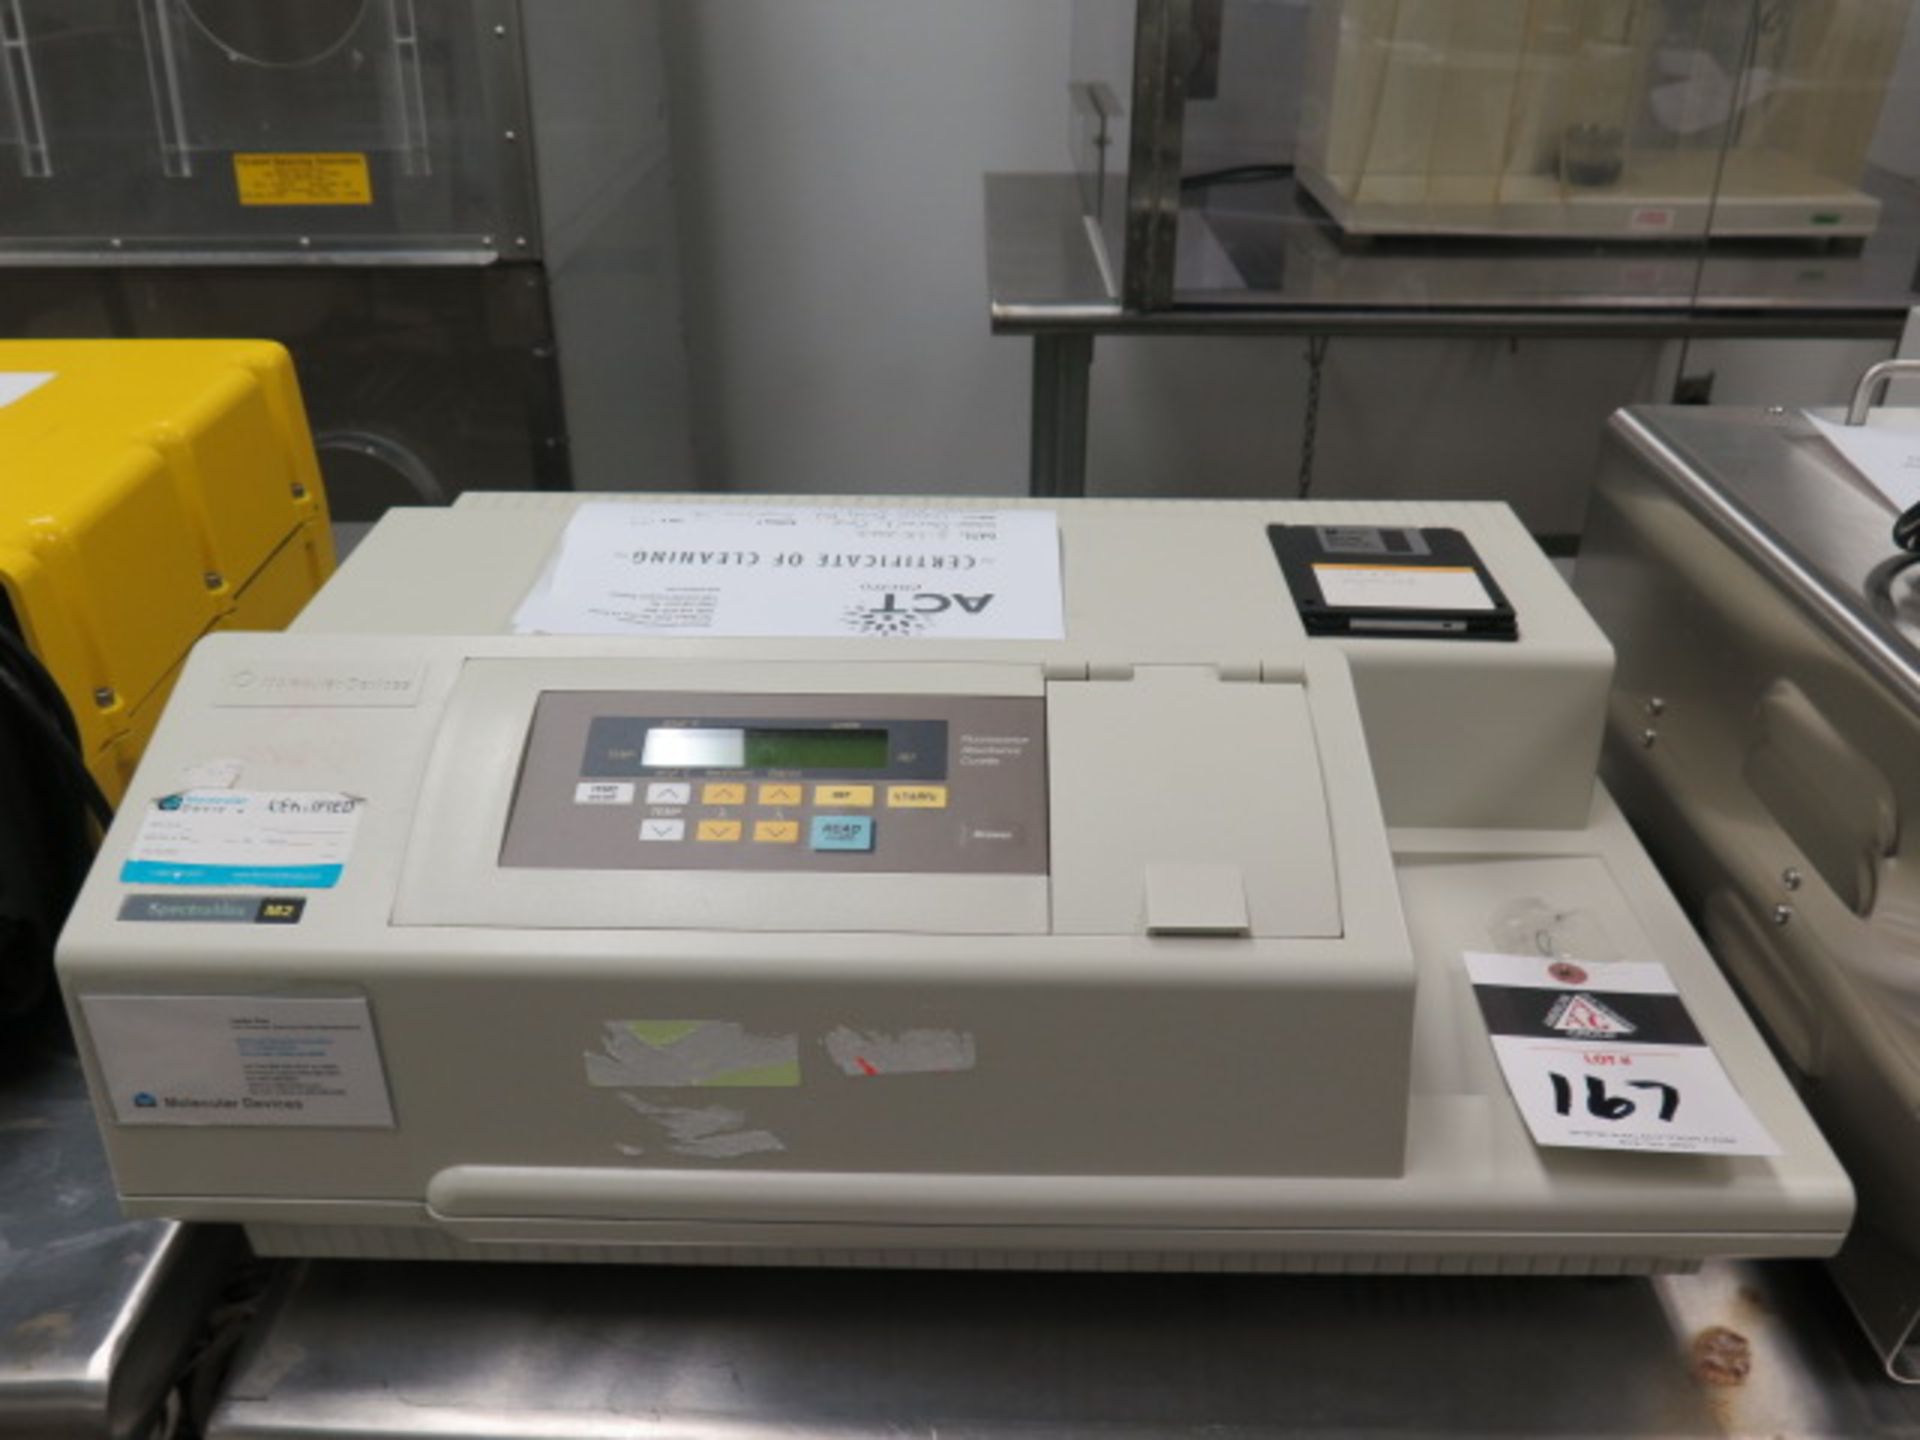 Molecular Devices “SPECTRAmax M2” Multi-Mode Microplate Plate Reader s/n D05153